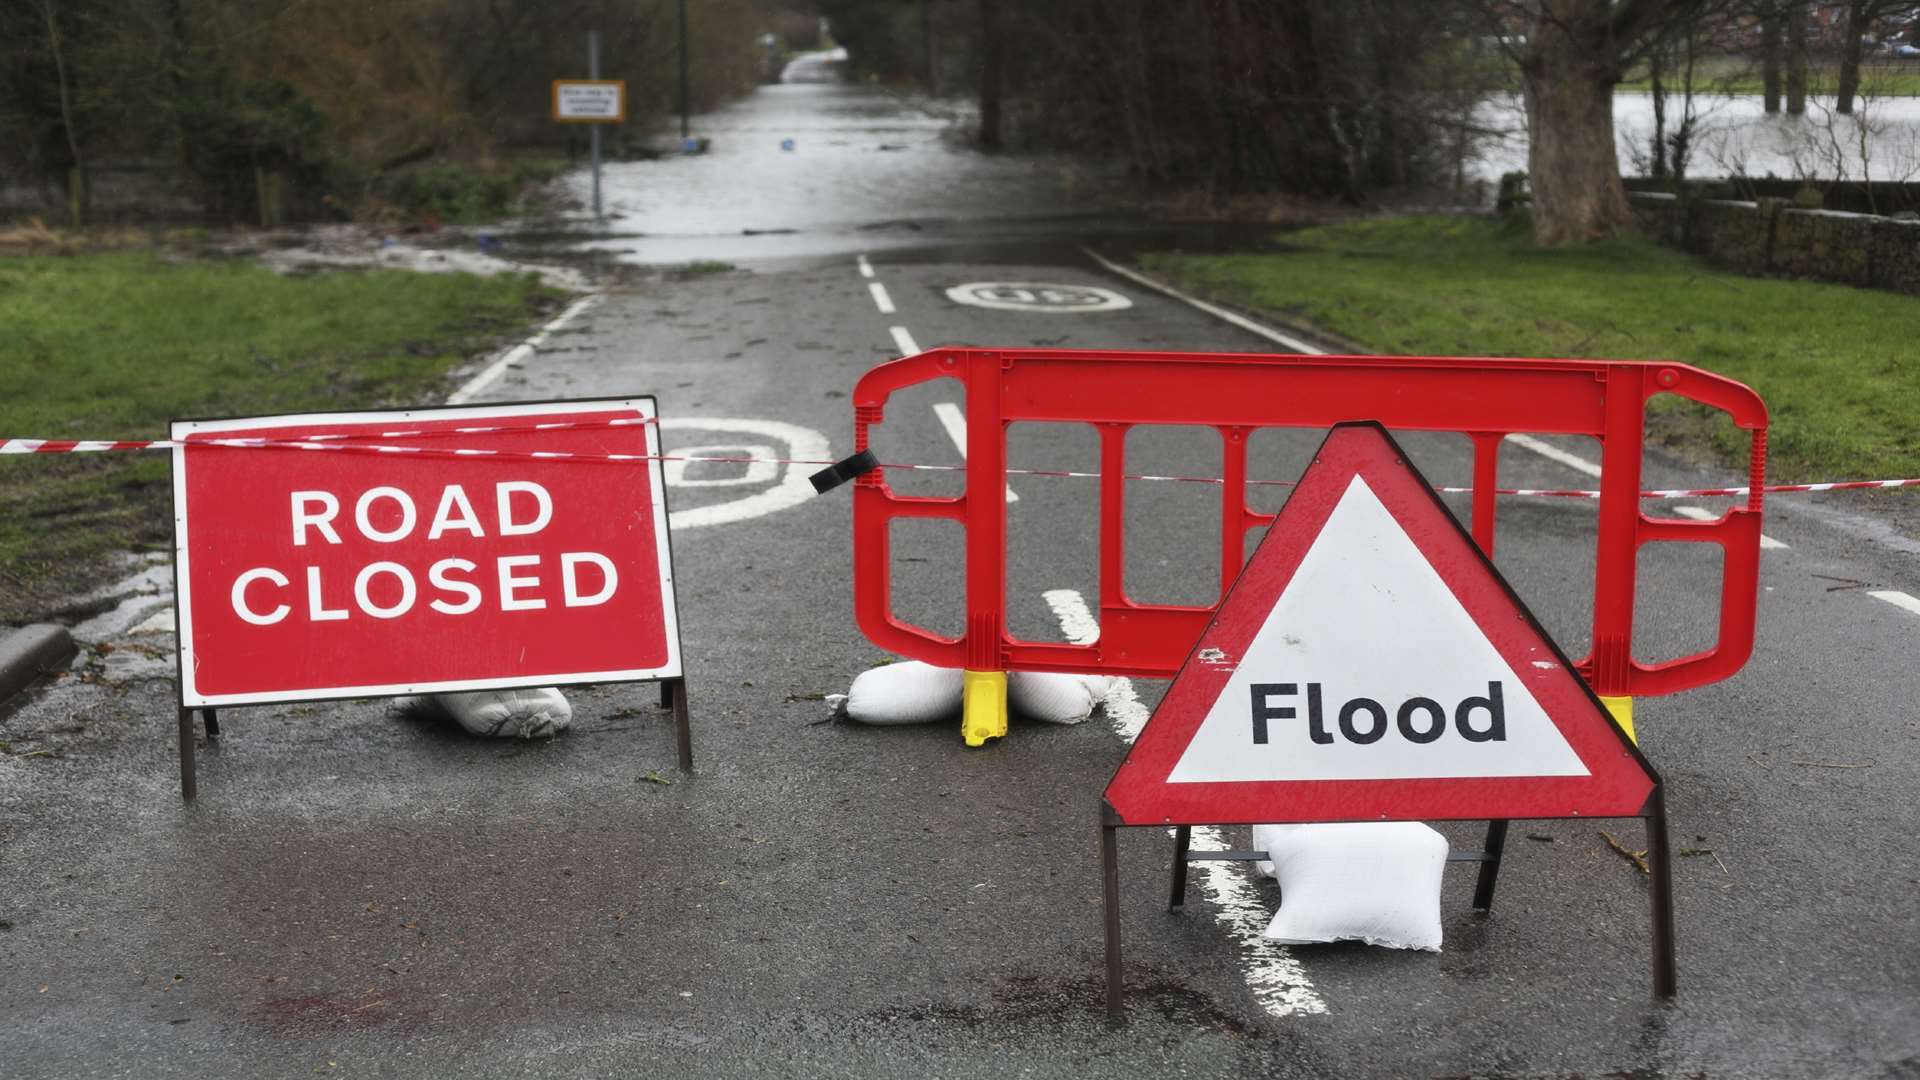 Sevenoaks District Council has awarding grants for residents and businesses that suffered during flooding last winter